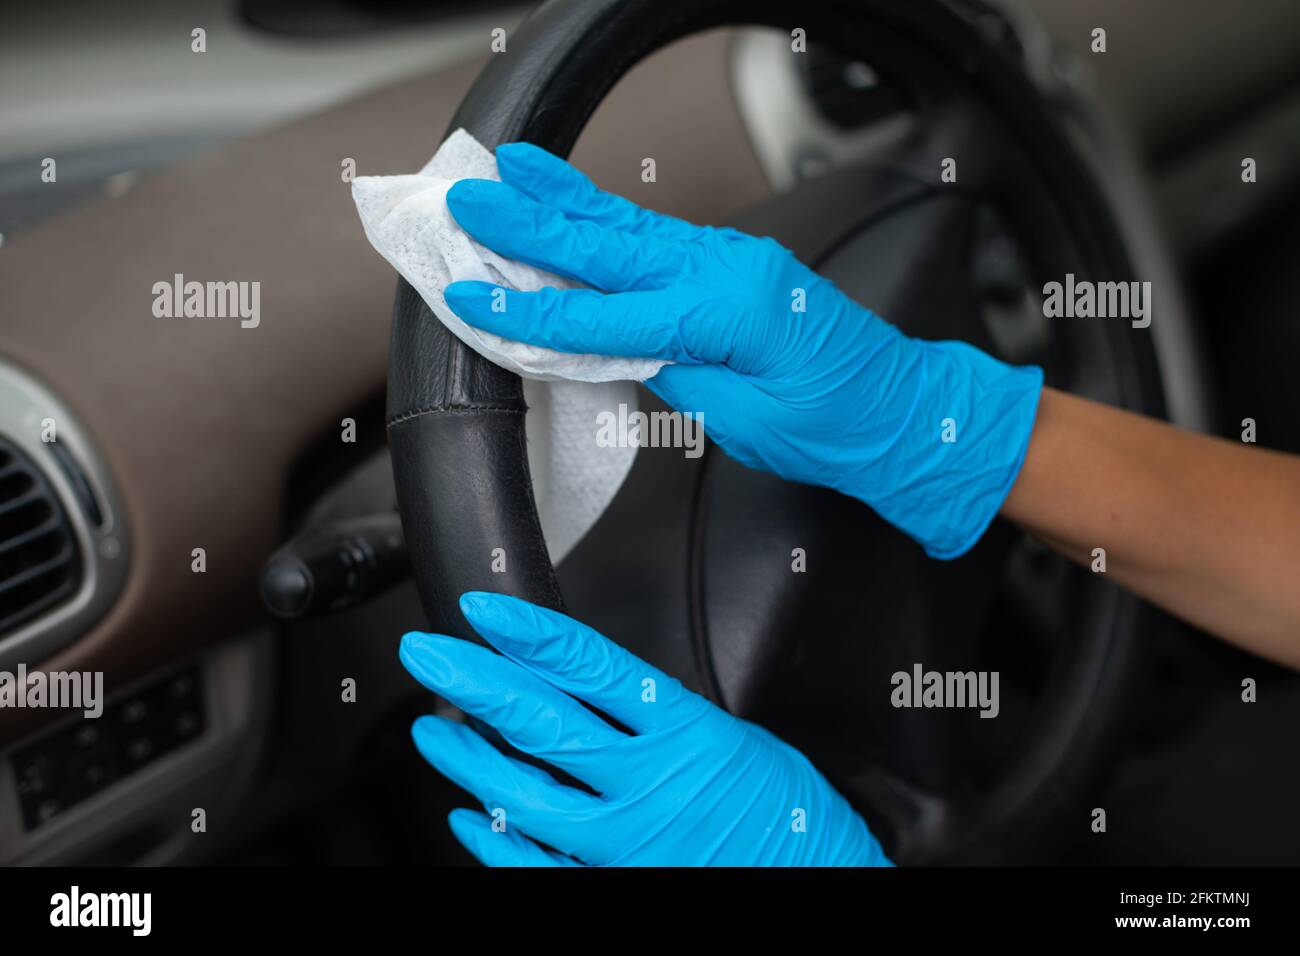 Cleaning car enterier wit antibacterial wet wipes. Stock Photo